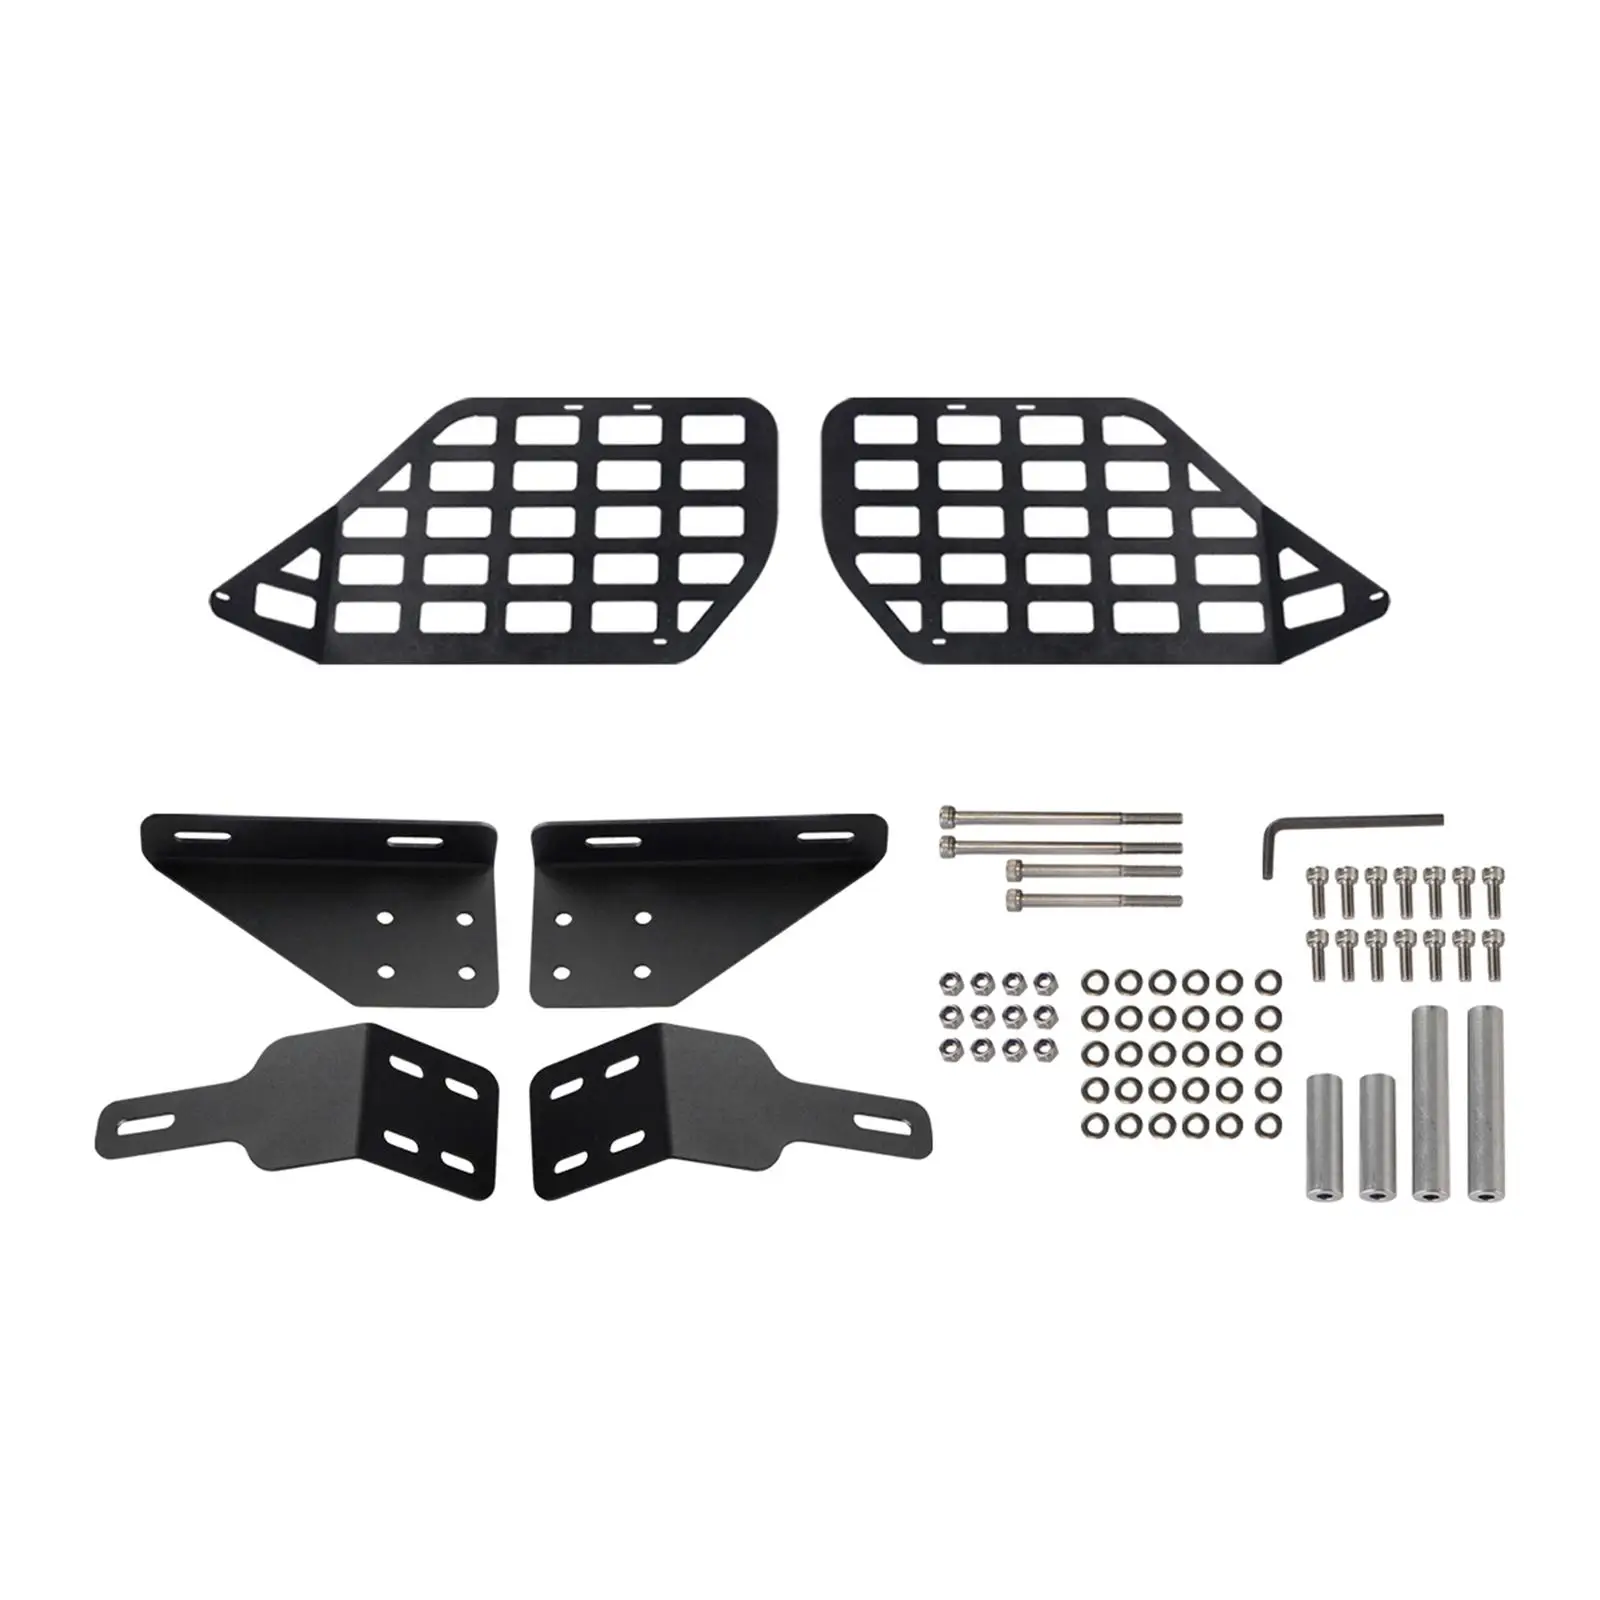 Modular Storage Panel System Rear Cargo Rack Replacement for Toyota for 4Runner